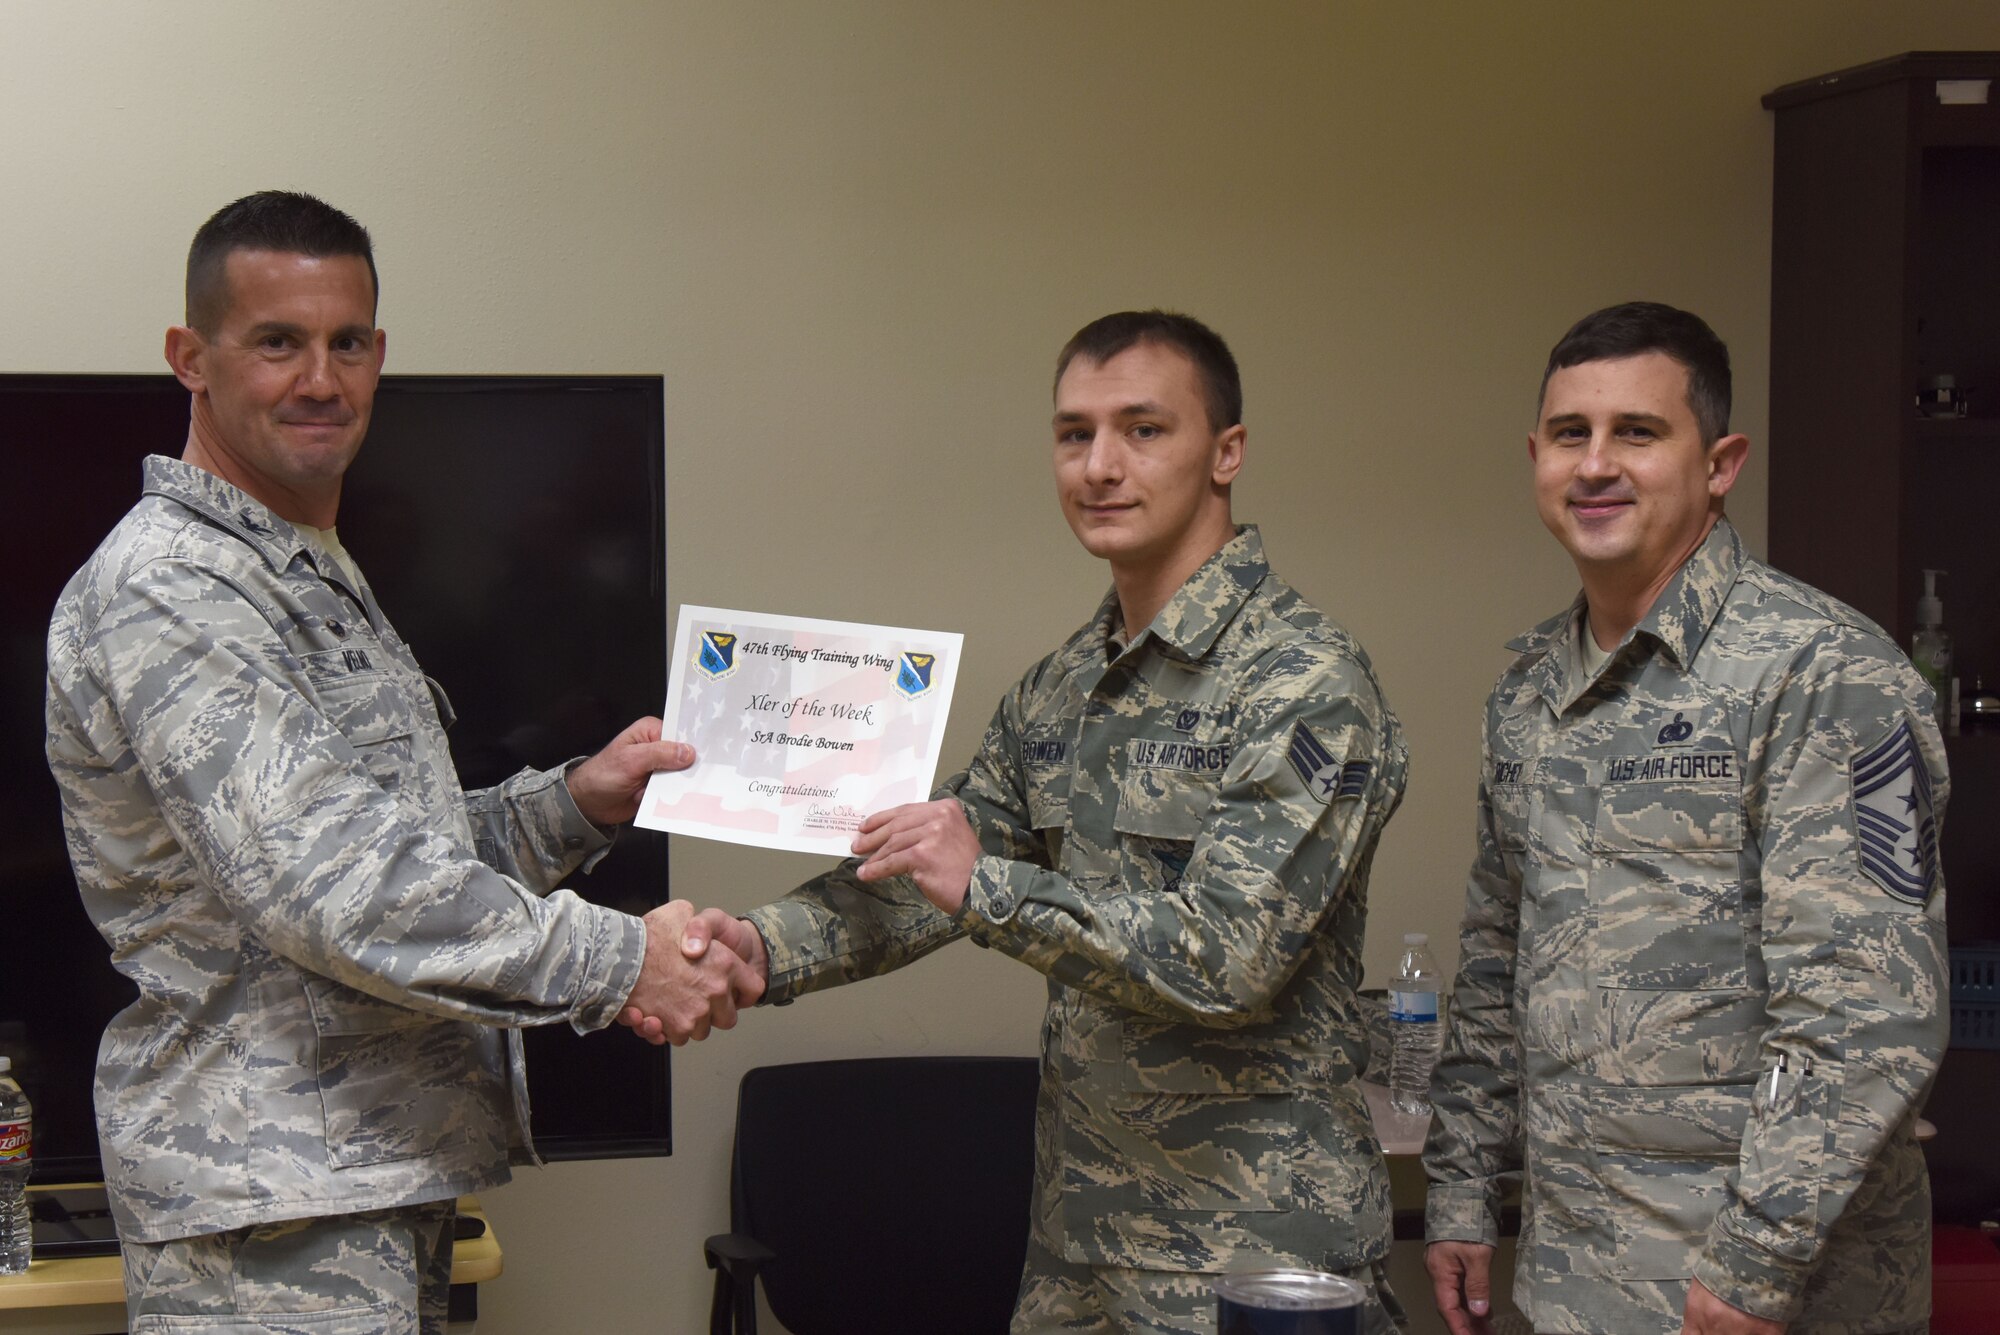 Senior Airman Brodie Bowen, 47th Civil Engineer Squadron fire emergency services driver operator, was chosen by wing leadership to be the “XLer” for the week of Jan. 15, 2018. The “XLer” award, presented by Col. Charlie Velino, 47th Flying Training Wing commander, is given to those who consistently make outstanding contributions to their unit and the Laughlin mission.